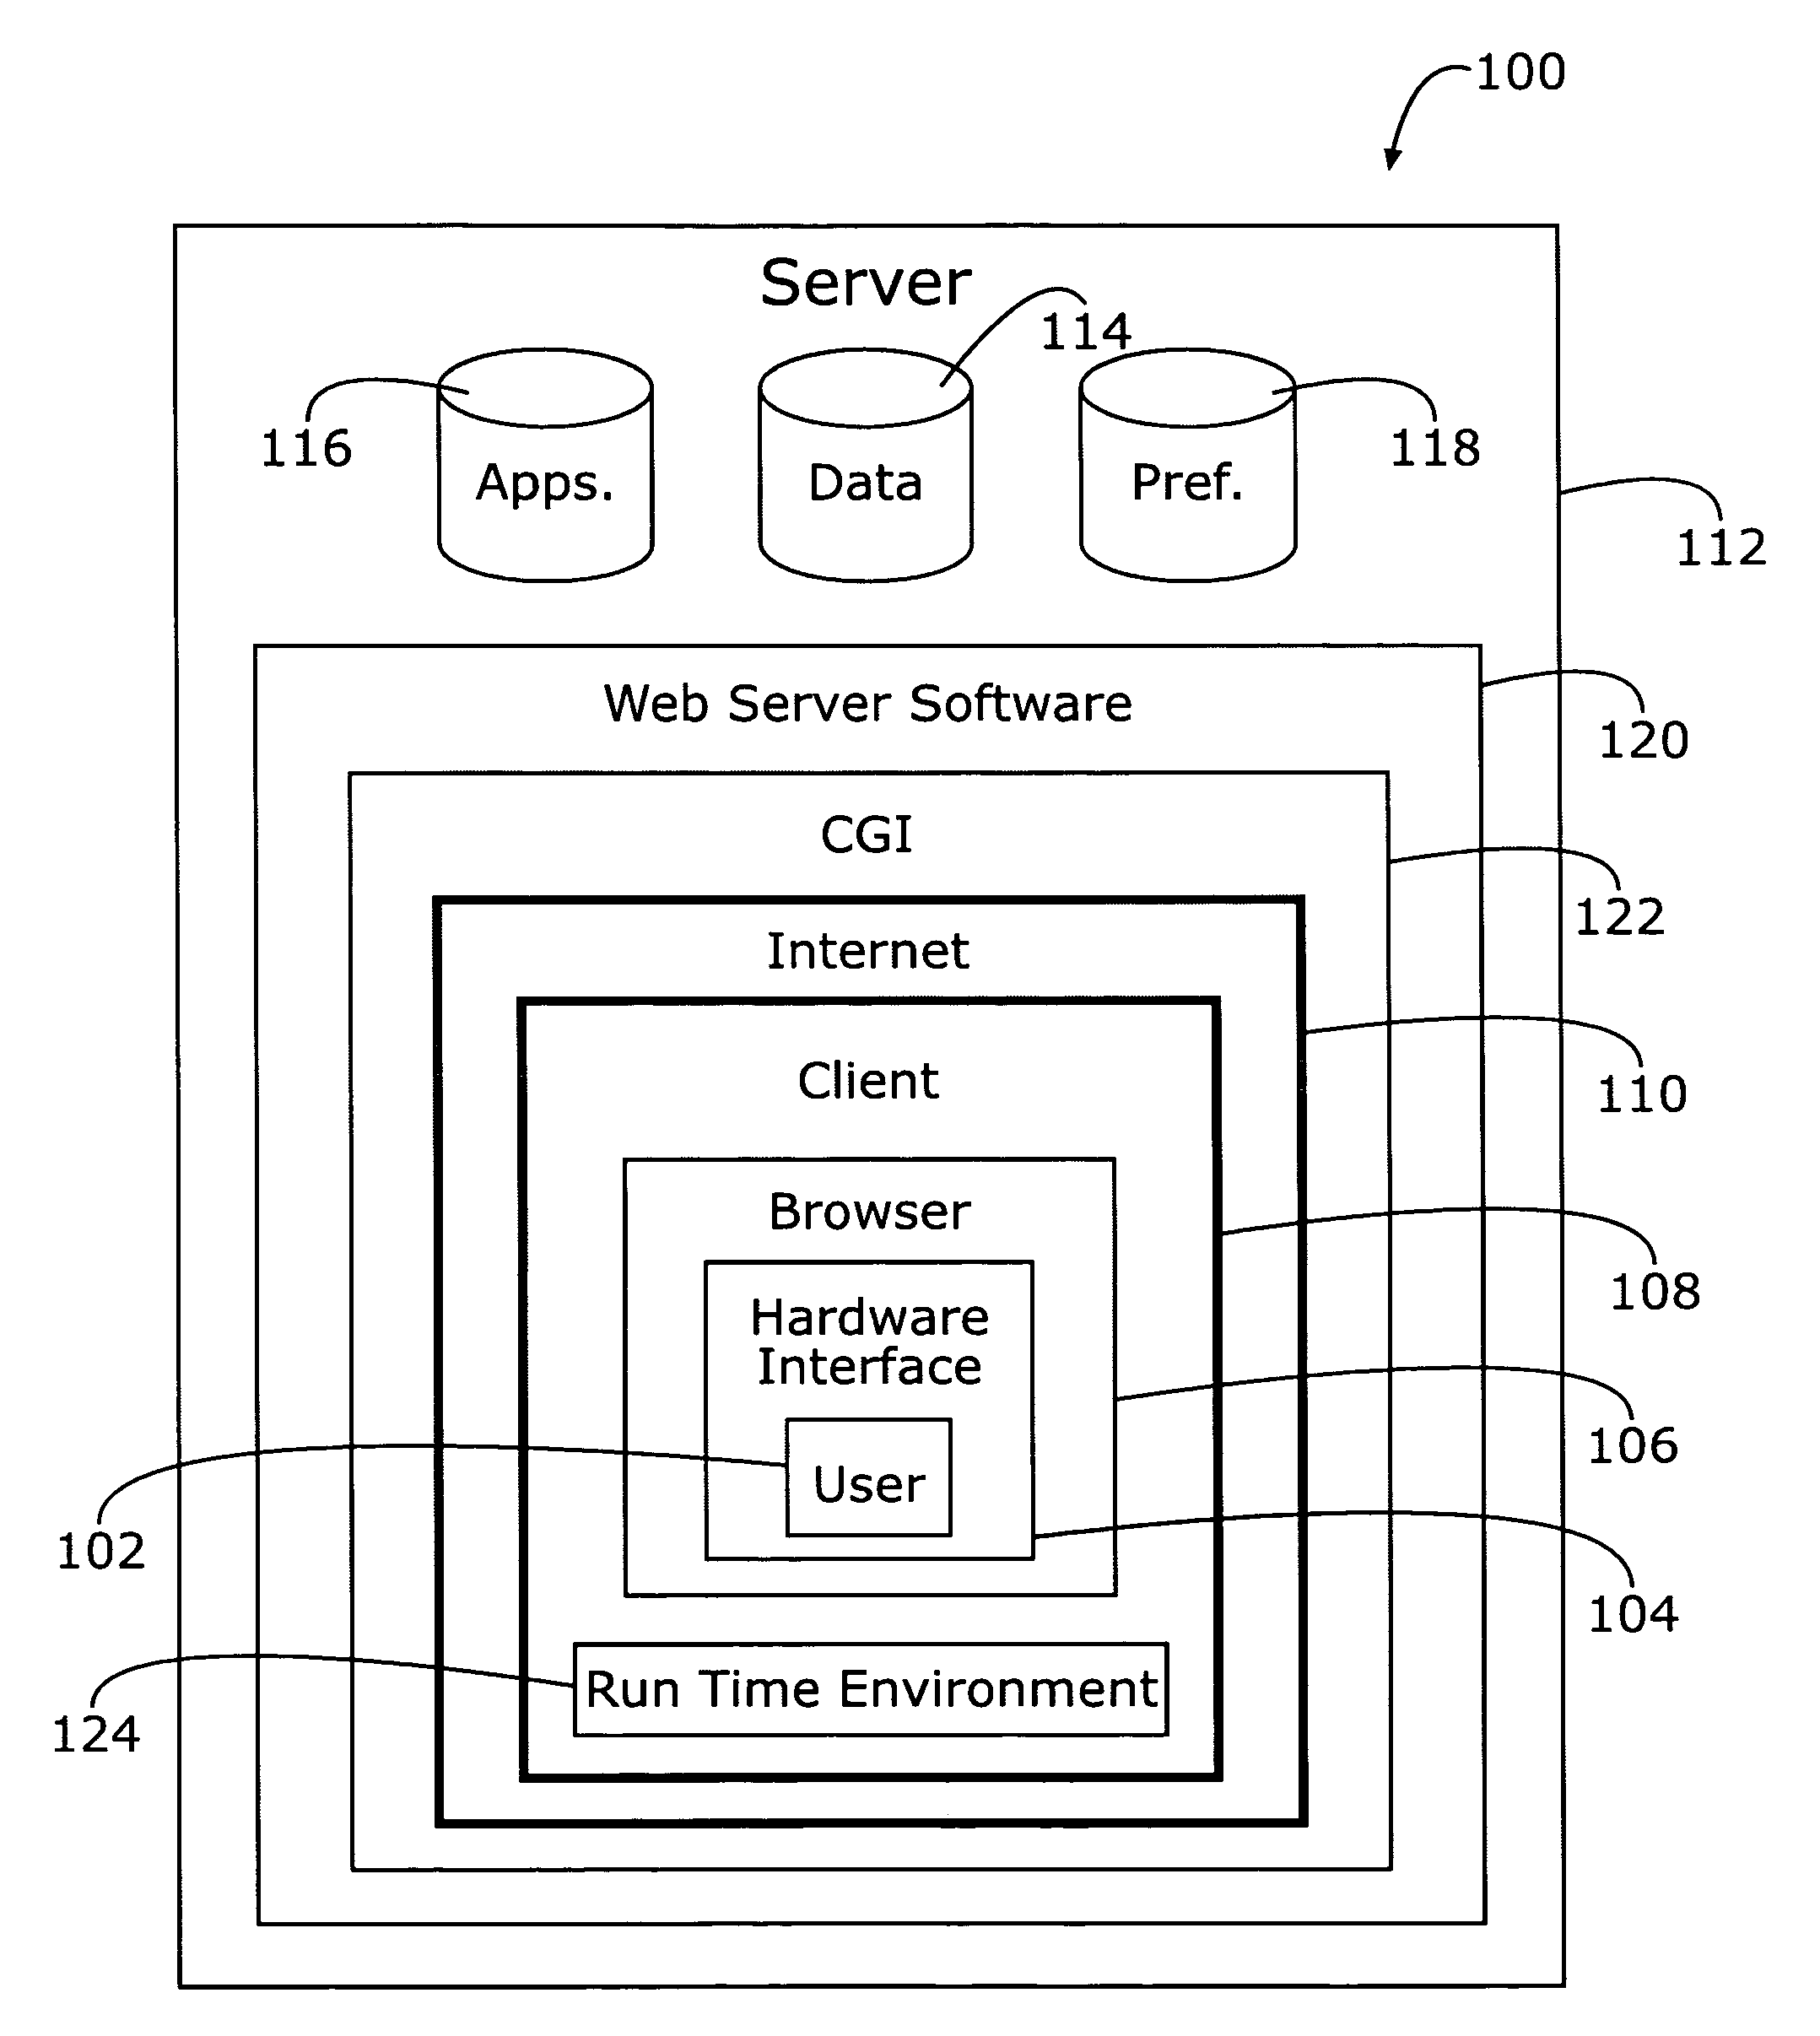 Internet operating system through embeddable applet-style application